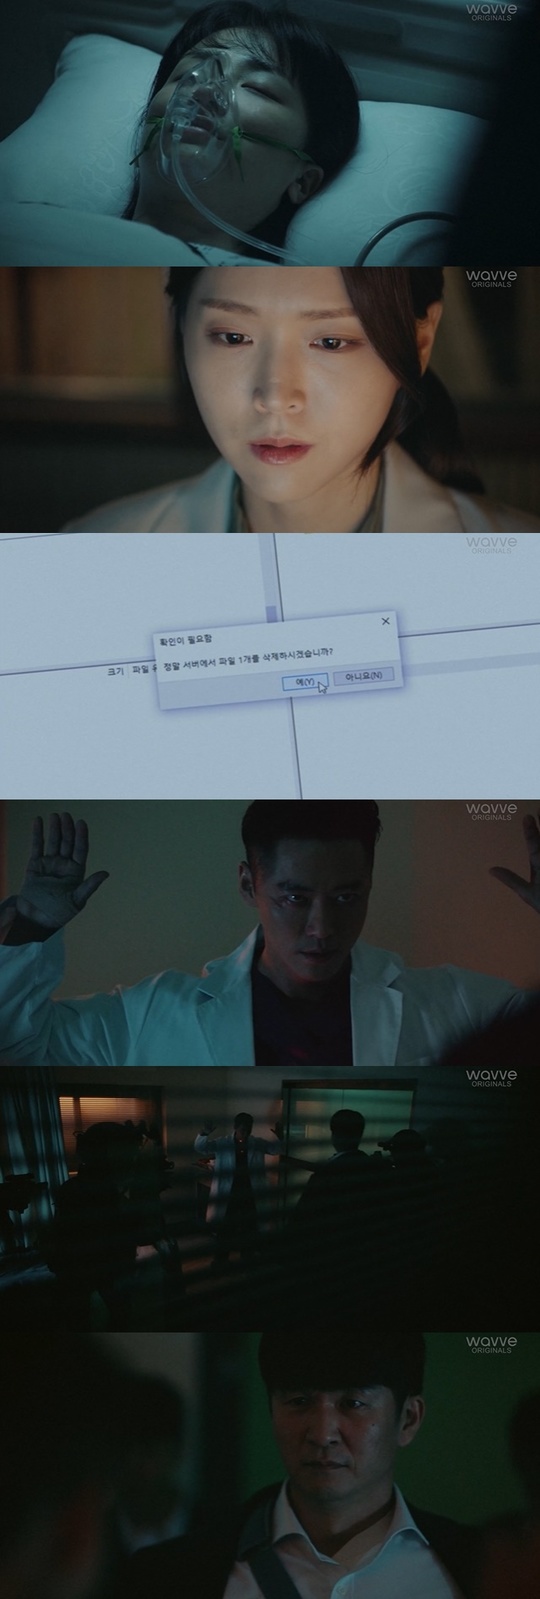 From Kim Ji Euns betrayal to Park Ha-suns death, Namgoong Min fell into Arlington Road where no one could believe anything.In the 6th MBC gilt drama The Veil (playplayed by Park Seok-ho and directed by Kim Sung-yong), which was broadcast on October 2, Han Ji-hyuk (Namgoong Min) approached the NIS retiree group Commerce Meeting.Kang Pil-ho (Kim Jong-tae) was arrested on the same day for allegedly shooting Seo Soo-yeon with a Falsified CCTV video, and Bang Yeong-chan (Kim Byung-ki), the director of the NIS, was a lone person.Kang Pil-ho asked his boss Do Jin-sook (Jang Young-nam) to neglect and ignore Han Ji-hyuks serious condition so far, saying, I will finish this with my hand.Kang Pil-ho went to the police station to pick up Han Ji-hyuk.However, Han Ji-hyuk did not believe Kang Pil-ho because Seo Soo-yeon, who was attacked earlier, left a warning saying, Do not believe Kang Kook-jang before he was distracted.Han Ji-hyuk escaped from a traffic accident on his way to NIS.Han Ji-hyuk, who was injured in the escape process, visited his partner and junior Jay Yooo (Kim Ji Eun).And Han Ji-hyuk, who woke up after losing consciousness, found the data of the Shenyang incident in Jay Yoos room and threatened Jay Yooo who just bought the necessary medicine.Han Ji-hyeok doubted why Jay Yooo approached him.Jay Yooo said, Father was an agent, but he disappeared on the graduation day of junior high school.I have officially asked more than a few dozen questions, and every time I came back, it was a different answer. So I decided to come here. Jay Yooo said, Now its my turn. Is not it you who shot Seo Soo-yeon?I saw CCTV where Han Ji-hyuk shot Seo Soo-yeon, but I wanted to hear the answer through his mouth. Han Ji-hyuk, who came to trust Jay Yooo again in this appearance, said, I do not know.Everything is as faint as it is in the fog. I am not sure which is really me. I think I saw someone at the scene. The next day, Do Jin-sook was reported by Ha Dong-gyun (Kim Do-hyun) that not only did the ammunition reaction come out from Han Ji-hyuks hands and clothes, but also the shell casing hit by Seo Soo-yeon did not match Han Ji-hyuks gun.However, Do Jin-sook chose to hide the evidence for the time being and make time to become the winner of the struggle.Hinpyon Jay Yooo found a clue to Falsified CCTV through an internal project number someone left in his place.The number in the memo was studied inside the NIS not long ago, but it was pointing to the Deep Fake technology project that was discontinued for some reason.Jay Yooo said, I was tracking the activities of those who participated in the project at that time, and a person named Bae Jong-soo was a bit suspicious.Bae Jong-soo, a developer who met Han Ji-hyuk, said, The project was overturned at NIS and I was immediately contacted by him as if he had waited.I went to work with a better pay offer and continued the project. I developed a tool to Falsify the video with Deep Fake, and later I did Falsify myself.The only way to prove Falsify is to find the original. The CCTV image that drove Han Ji-hyuk to the suspect was also Falsified with the technology.Han Ji-hyeok also found out that he was preparing an article by covering North Korean defectors until he left the newspaper where Jung Gi-seon was attending.Han Ji-hyuk speculated that the article prepared by Jung Ki-sun may be the essence of this case.In order to know the essence of this, I had to meet with the current NIS, Jung Gi-seon, and Han Ji-hyuk contacted Kang Pil-ho first.Han Ji-hyeok proposed embroidery if it allowed him to meet Jung Gi-seon.Kang Pil-ho, who received the proposal, showed the cruelty of placing a sniper in a tangent place with a large floating population in order to make this place a stepping stone to catch Han Ji-hyuk.However, Han Ji-hyuk reversed the deep-fake technology that attacked him, changed his face to Seo Soo-yeon, and he was out of Kang Pil-ho in a way that stimulated Kang Pil-hos guilt.In the end, Kang Pil-ho hesitated to fire Han Ji-hyuk, and Han Ji-hyuk succeeded in running away with the regular ship.Han Ji-hyuk asked Jung Gi-sun about the article he was writing until just before the departure of the newspaper, saying that the person behind his colleagues death and the person who is currently aiming for the line are the same.I learned about the existence of a private organization composed of NIS retirees. It was called the Commerce Society.A year ago, a list of agents was leaked from China. It was said that the business association manipulated it. We received a report from a person at the scene at the time of the leak.However, Whistle Blower decided to meet in Shenyang six months ago, but it was also said that he was not contacted.Han Ji-hyuk guessed that Whistle Blower was Jang Chun-woo at the time of six months ago.